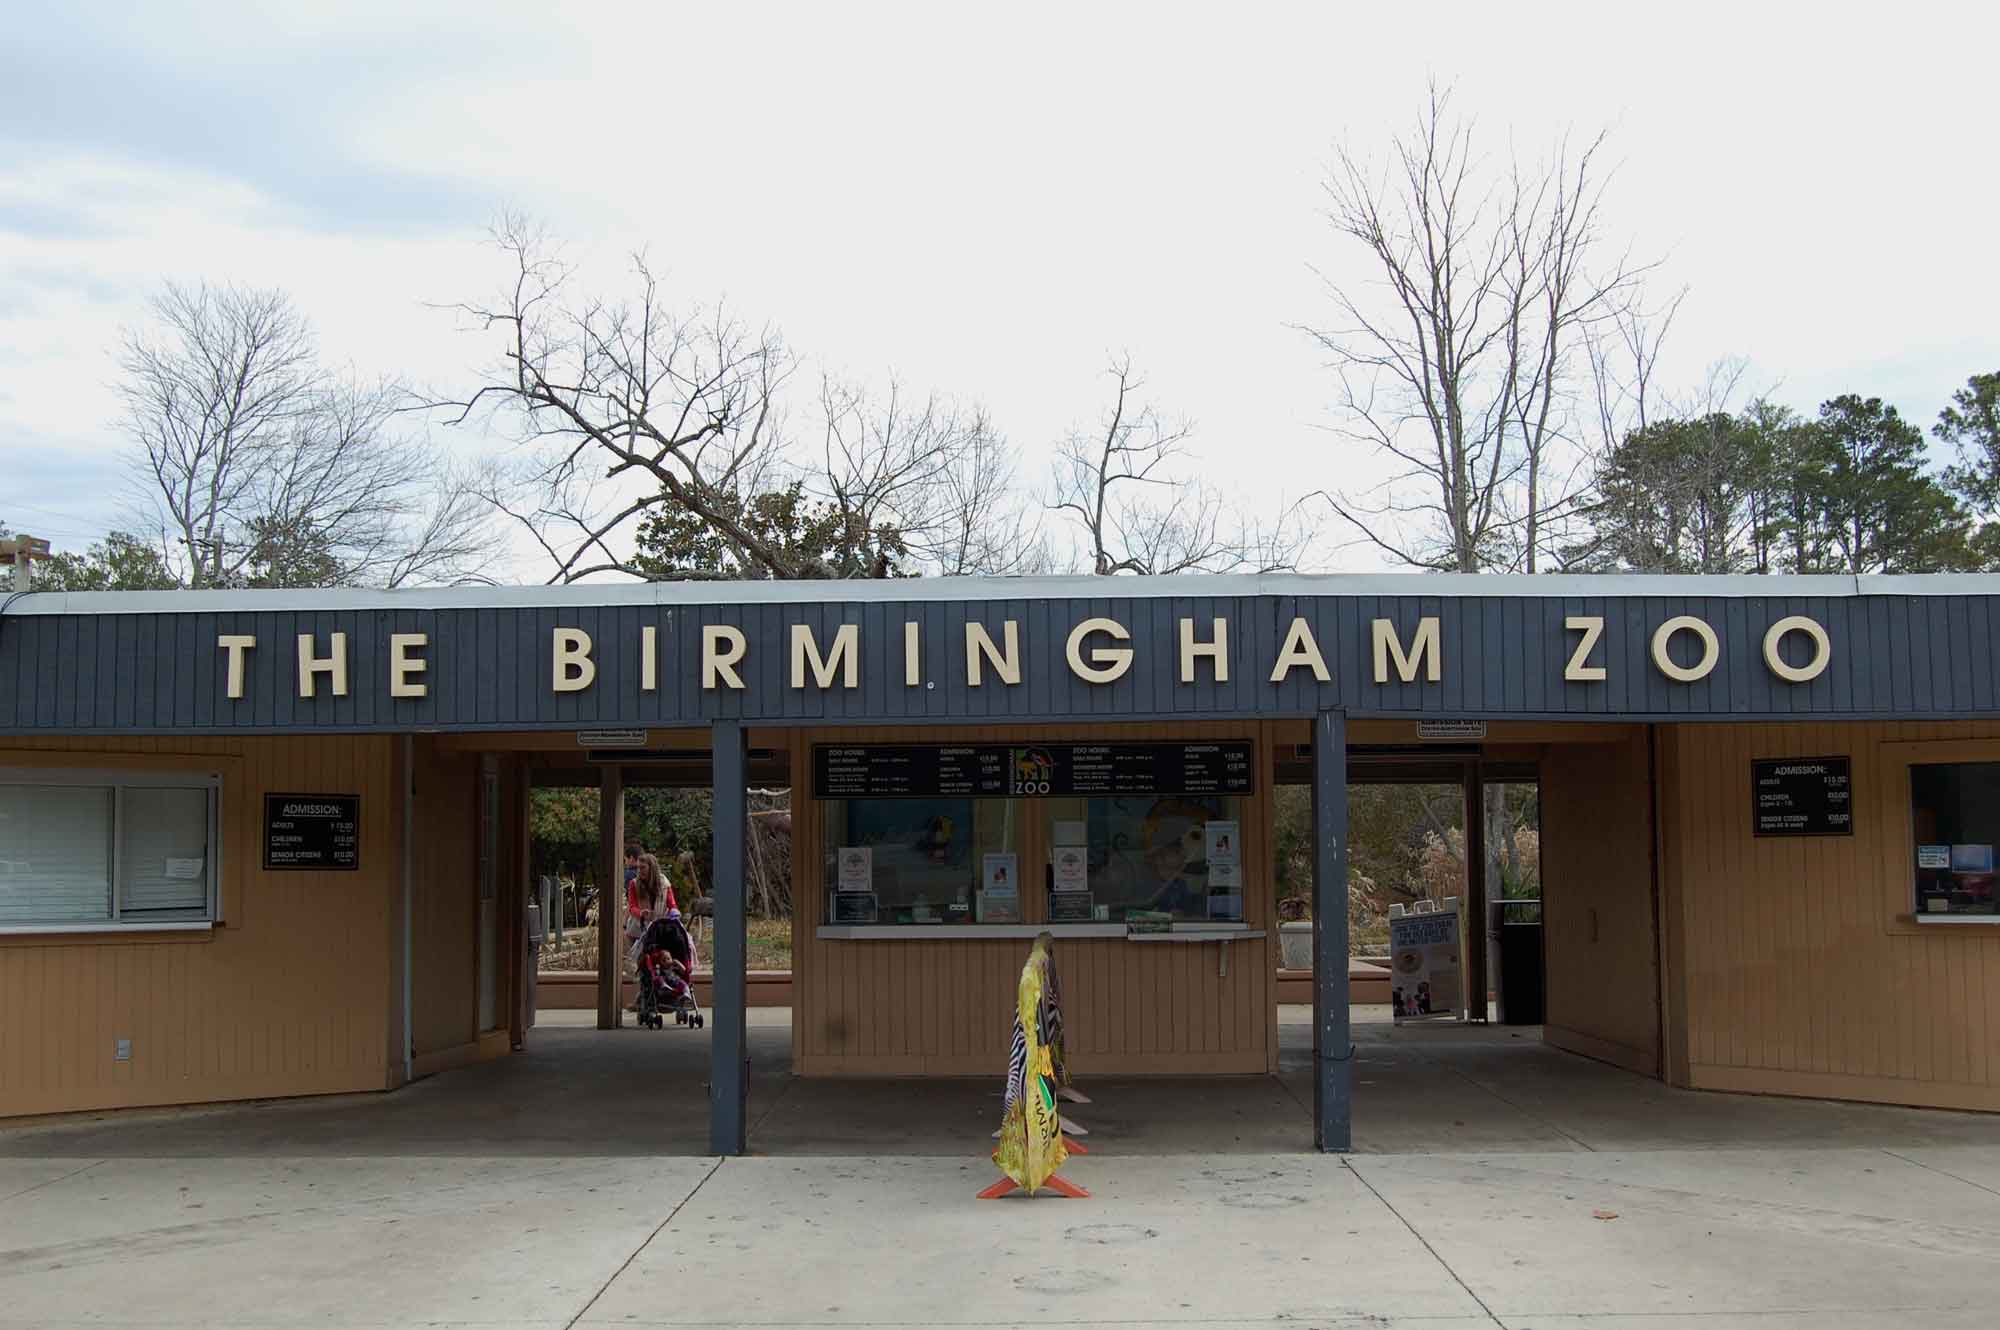 Birmingham Zoo offers free admission to active, retired military